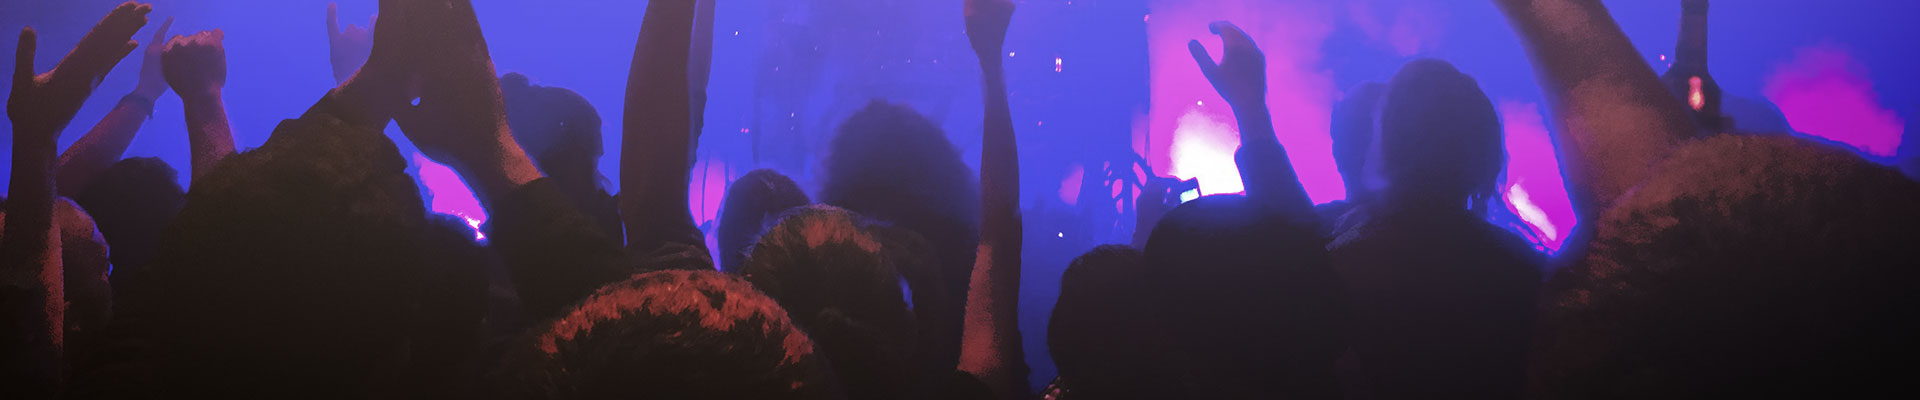 Dancing people at a concert